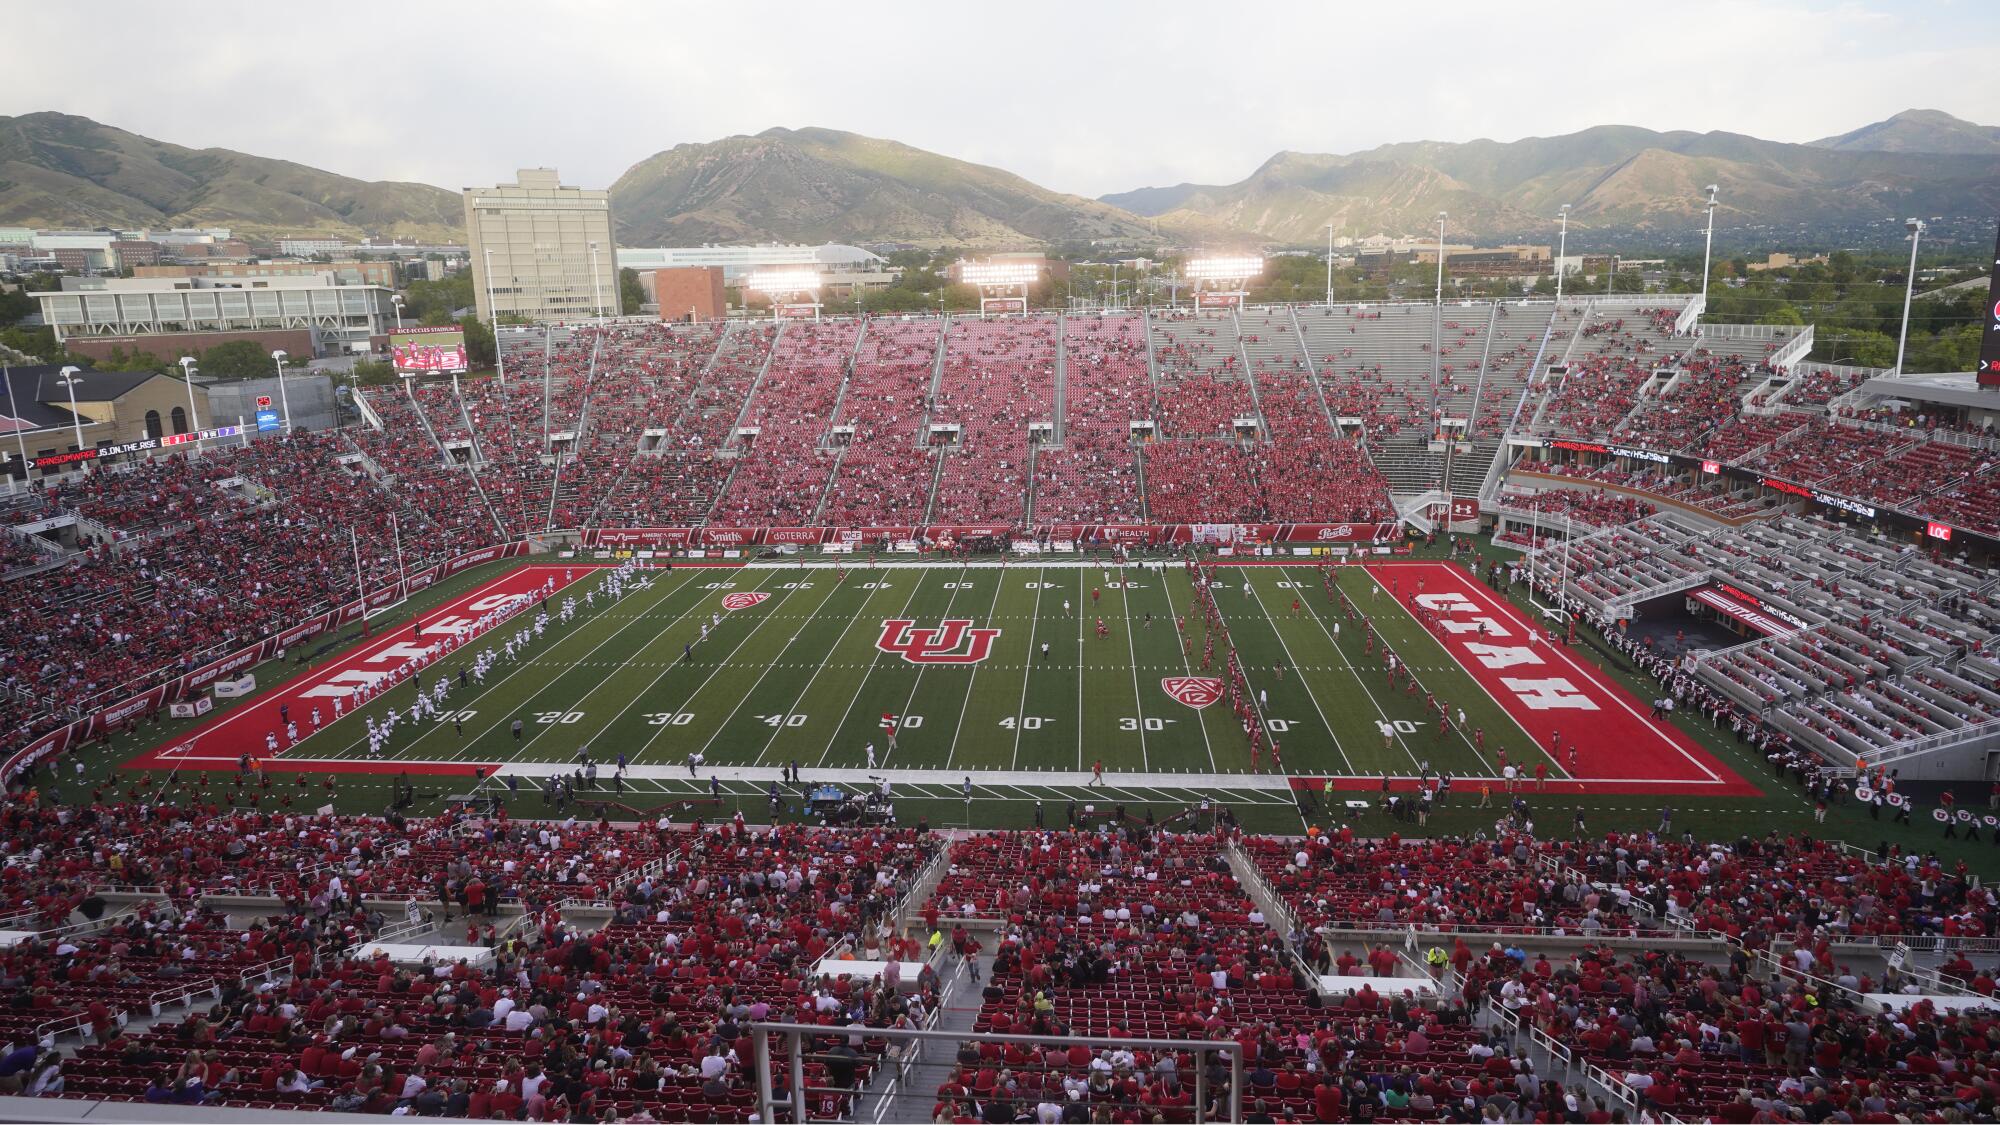 Fans at Rice-Eccles Stadium wait for the start of a game.